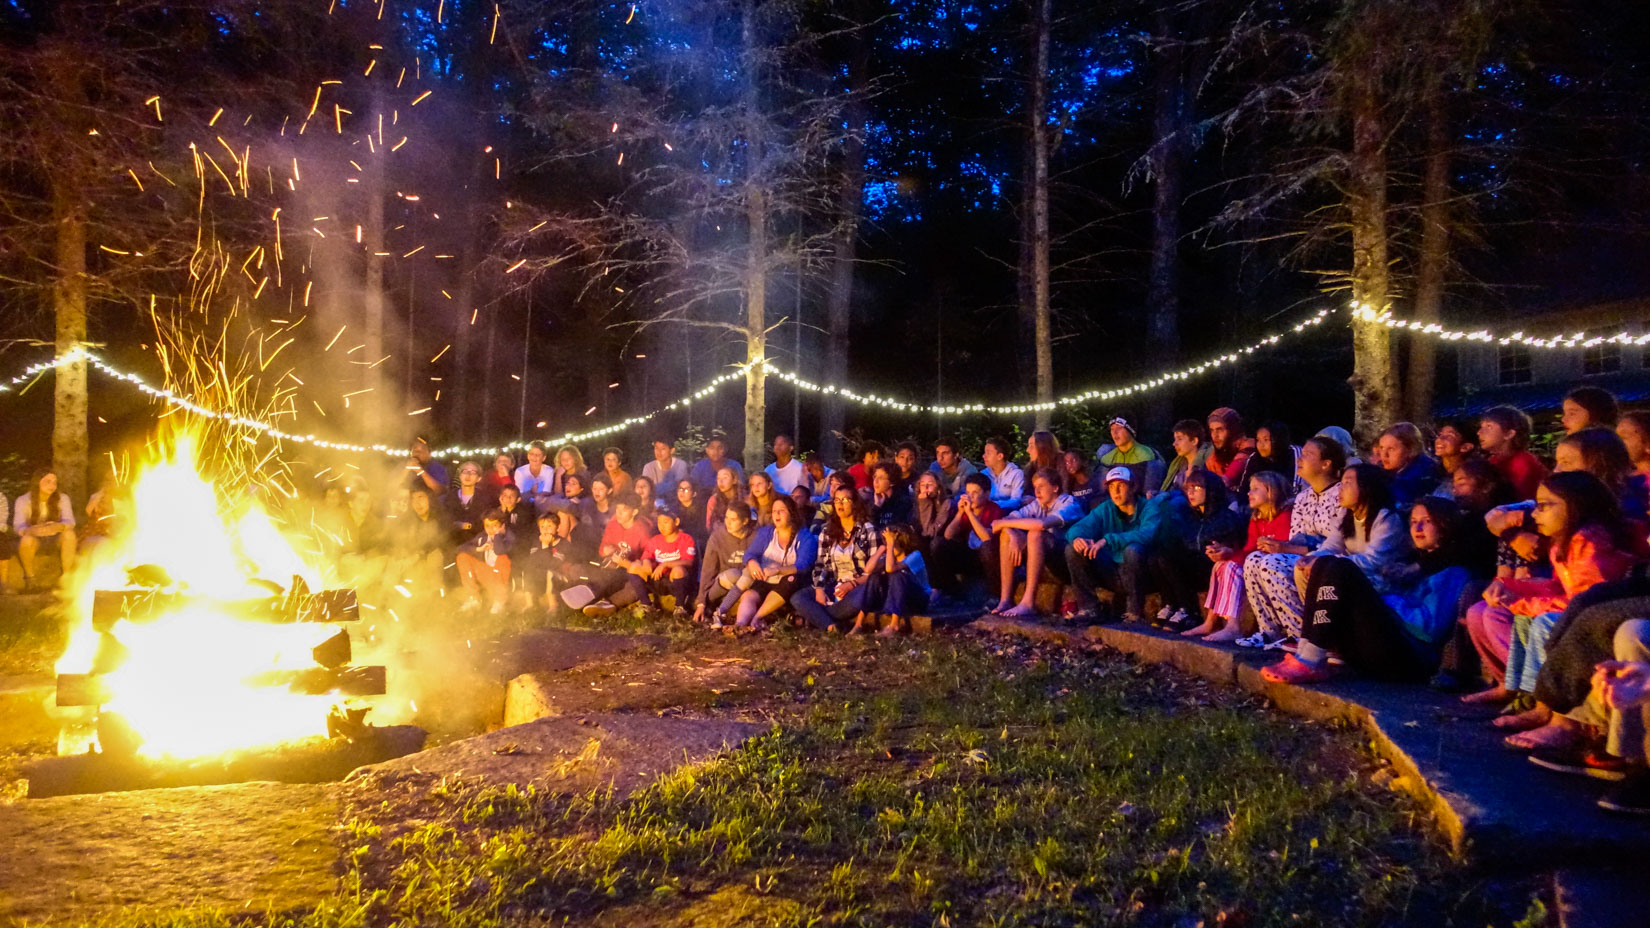 Campers gathered around a campfire at night.